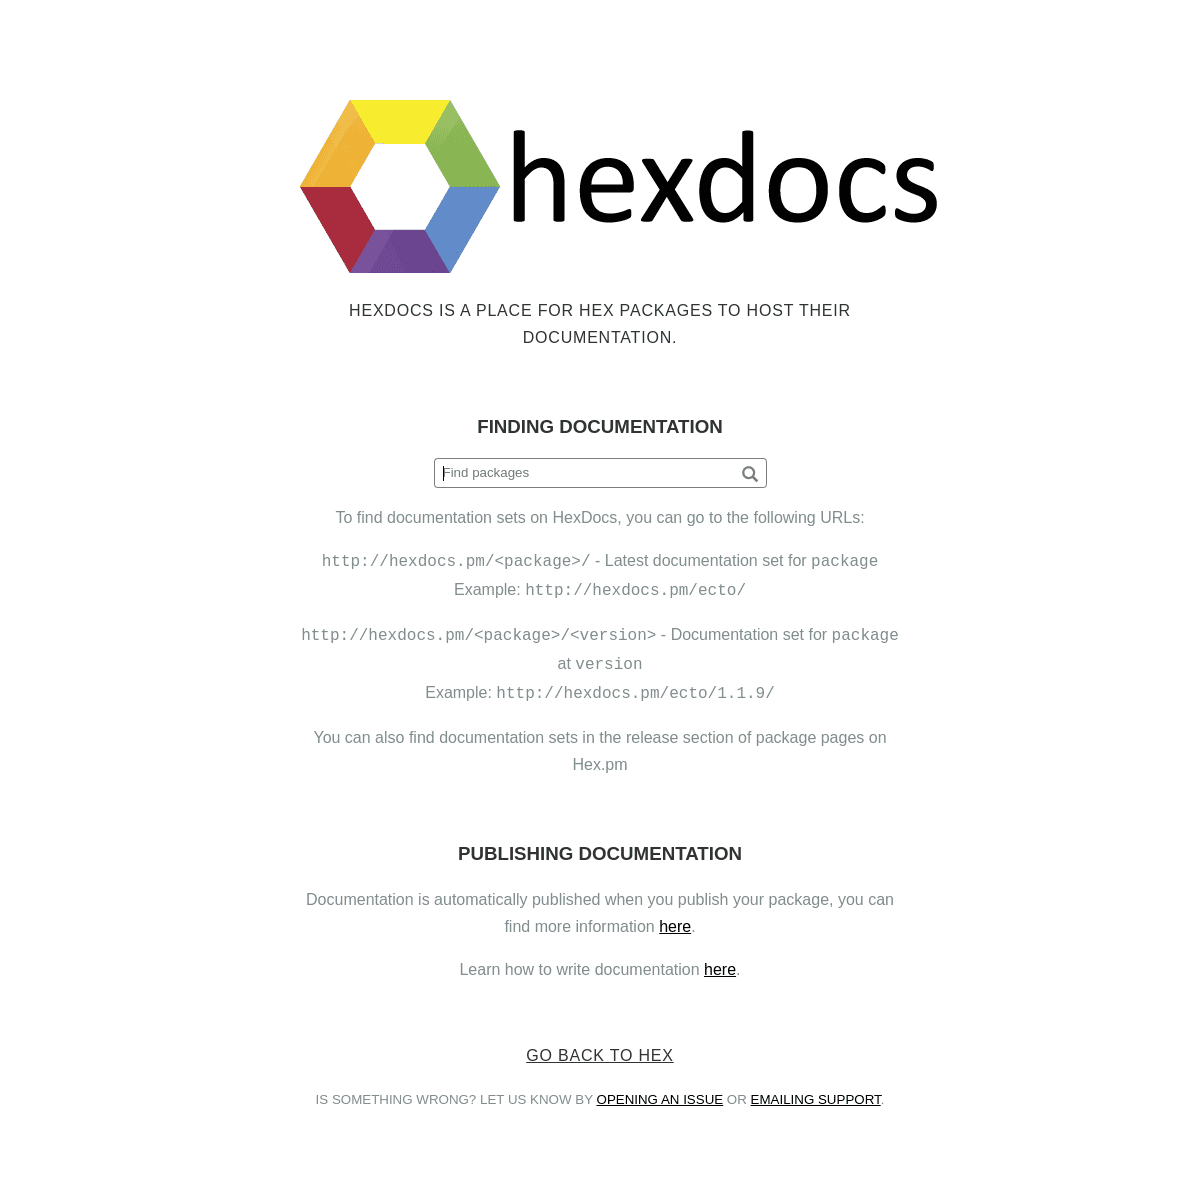 A complete backup of https://hexdocs.pm